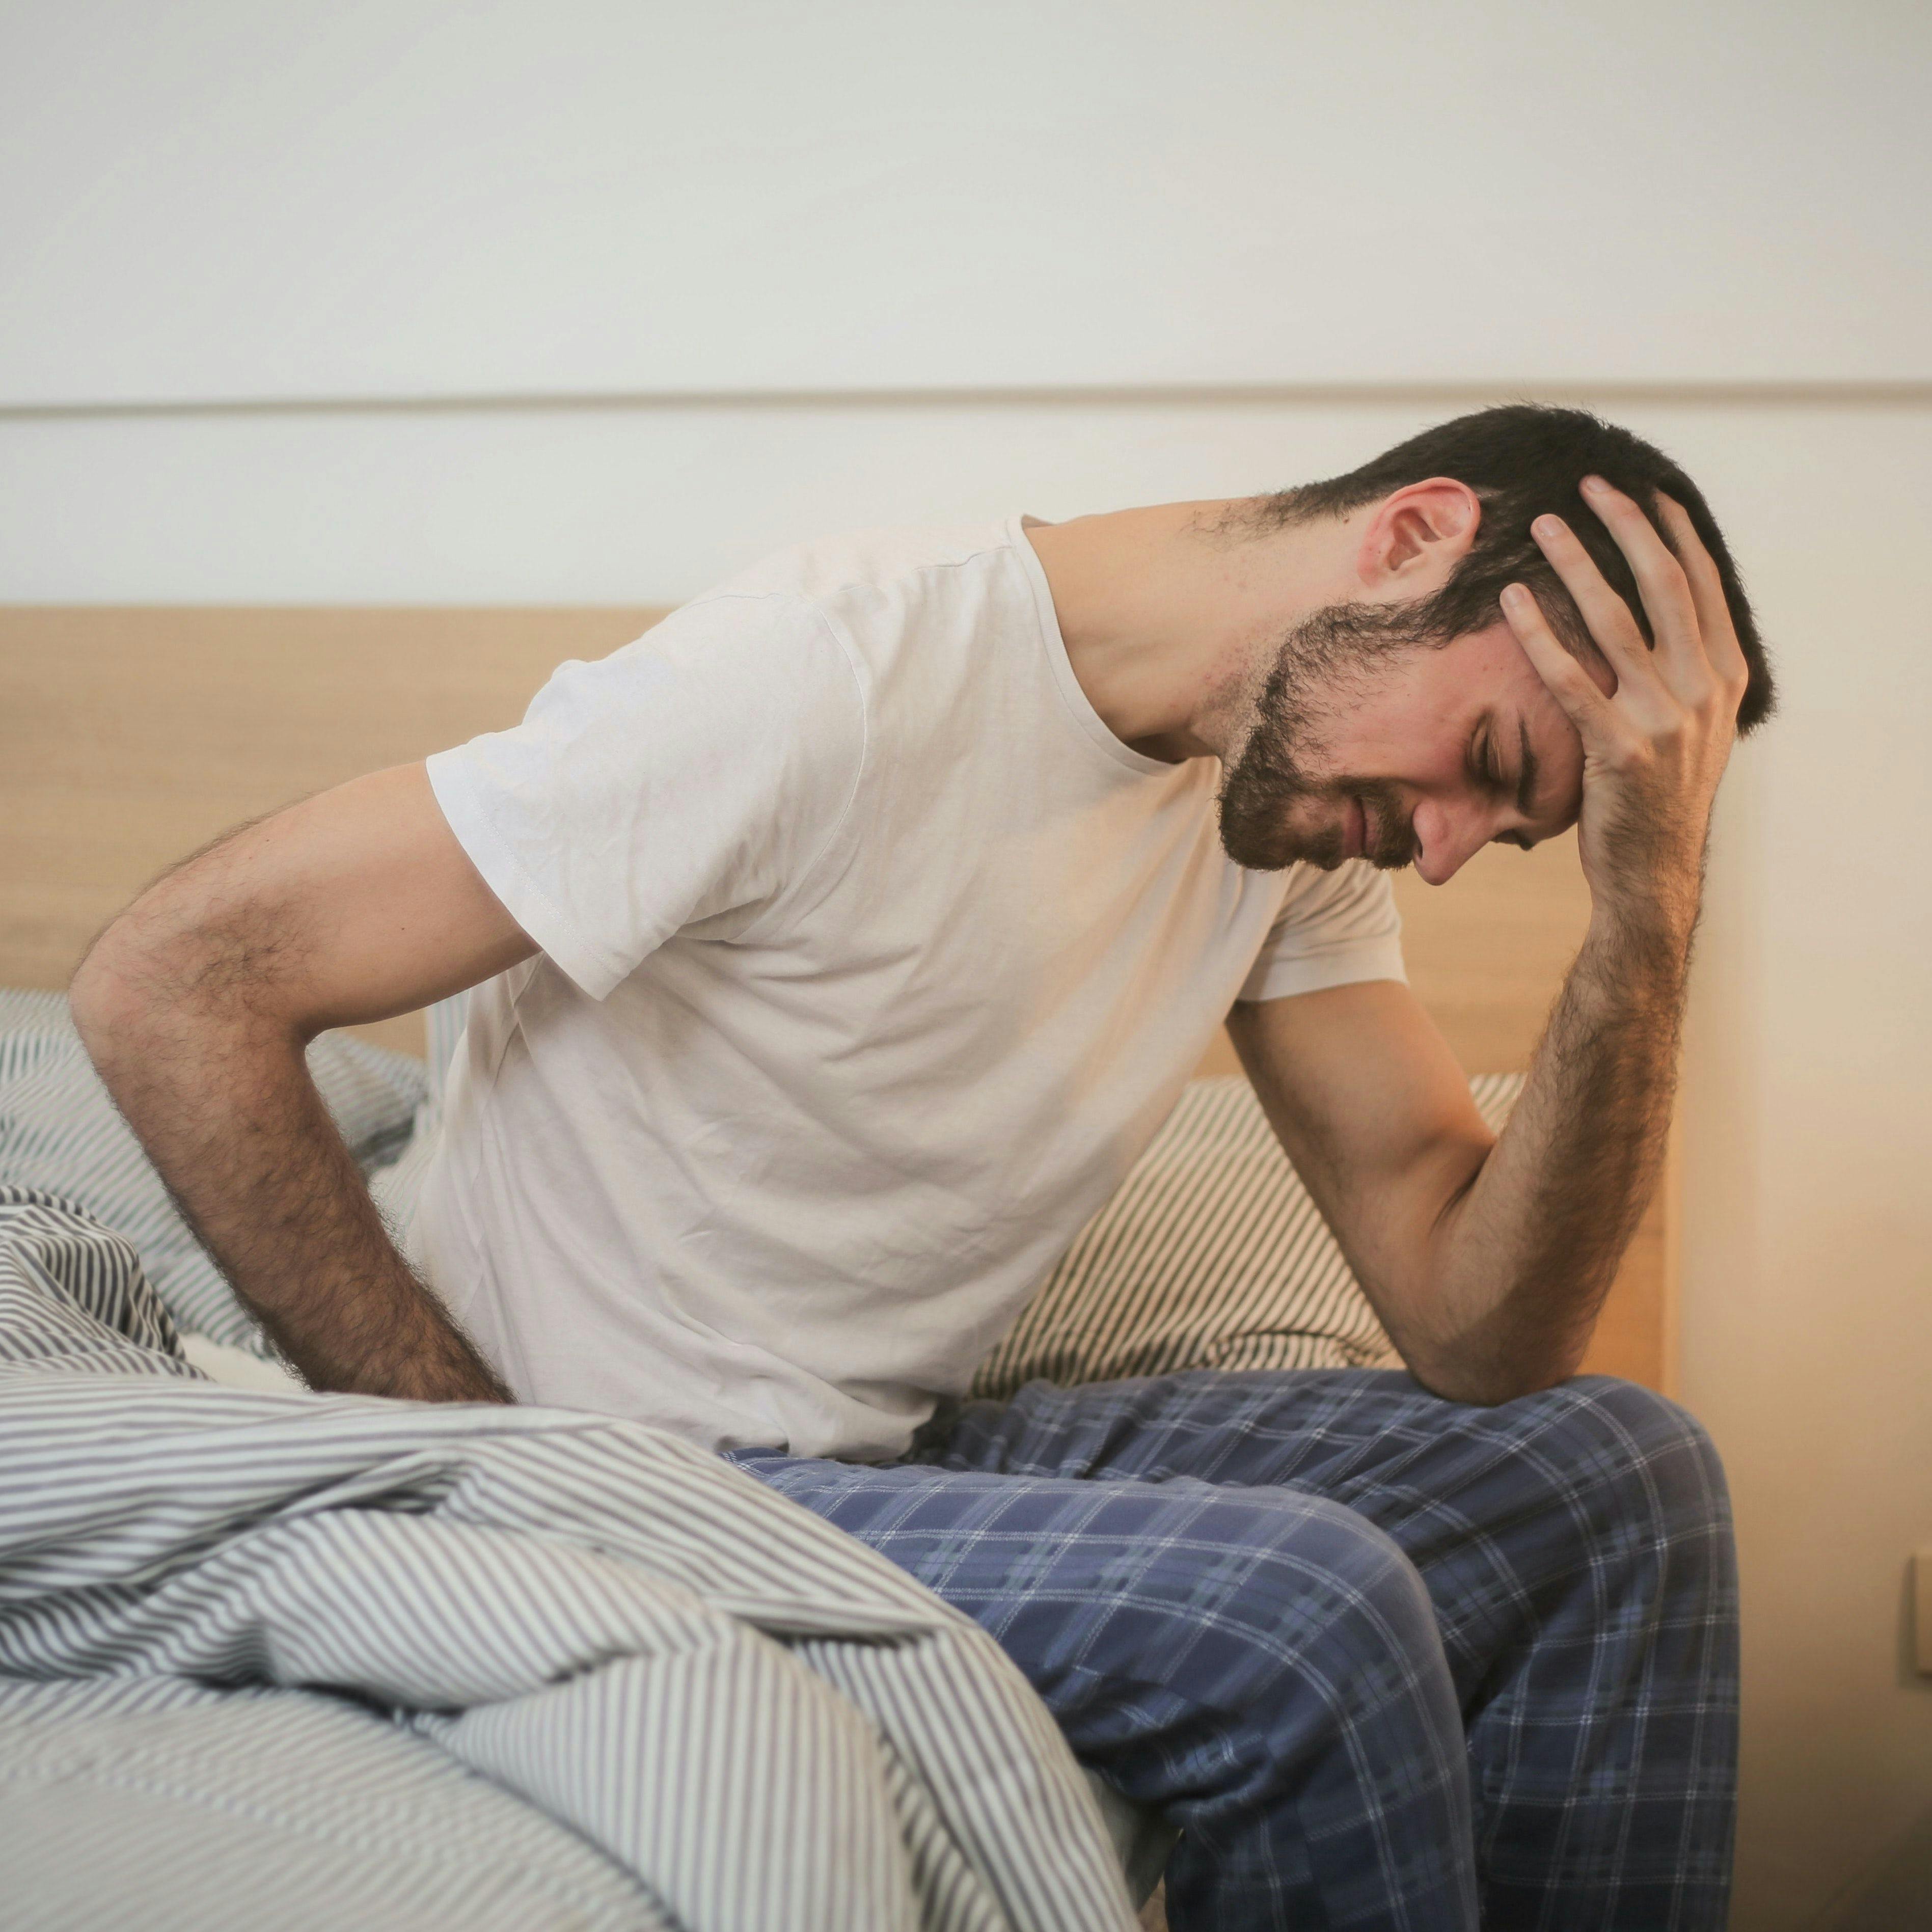 Chronic Migraine and Insomnia Have a Strong Bidirectional Relationship, Study Finds